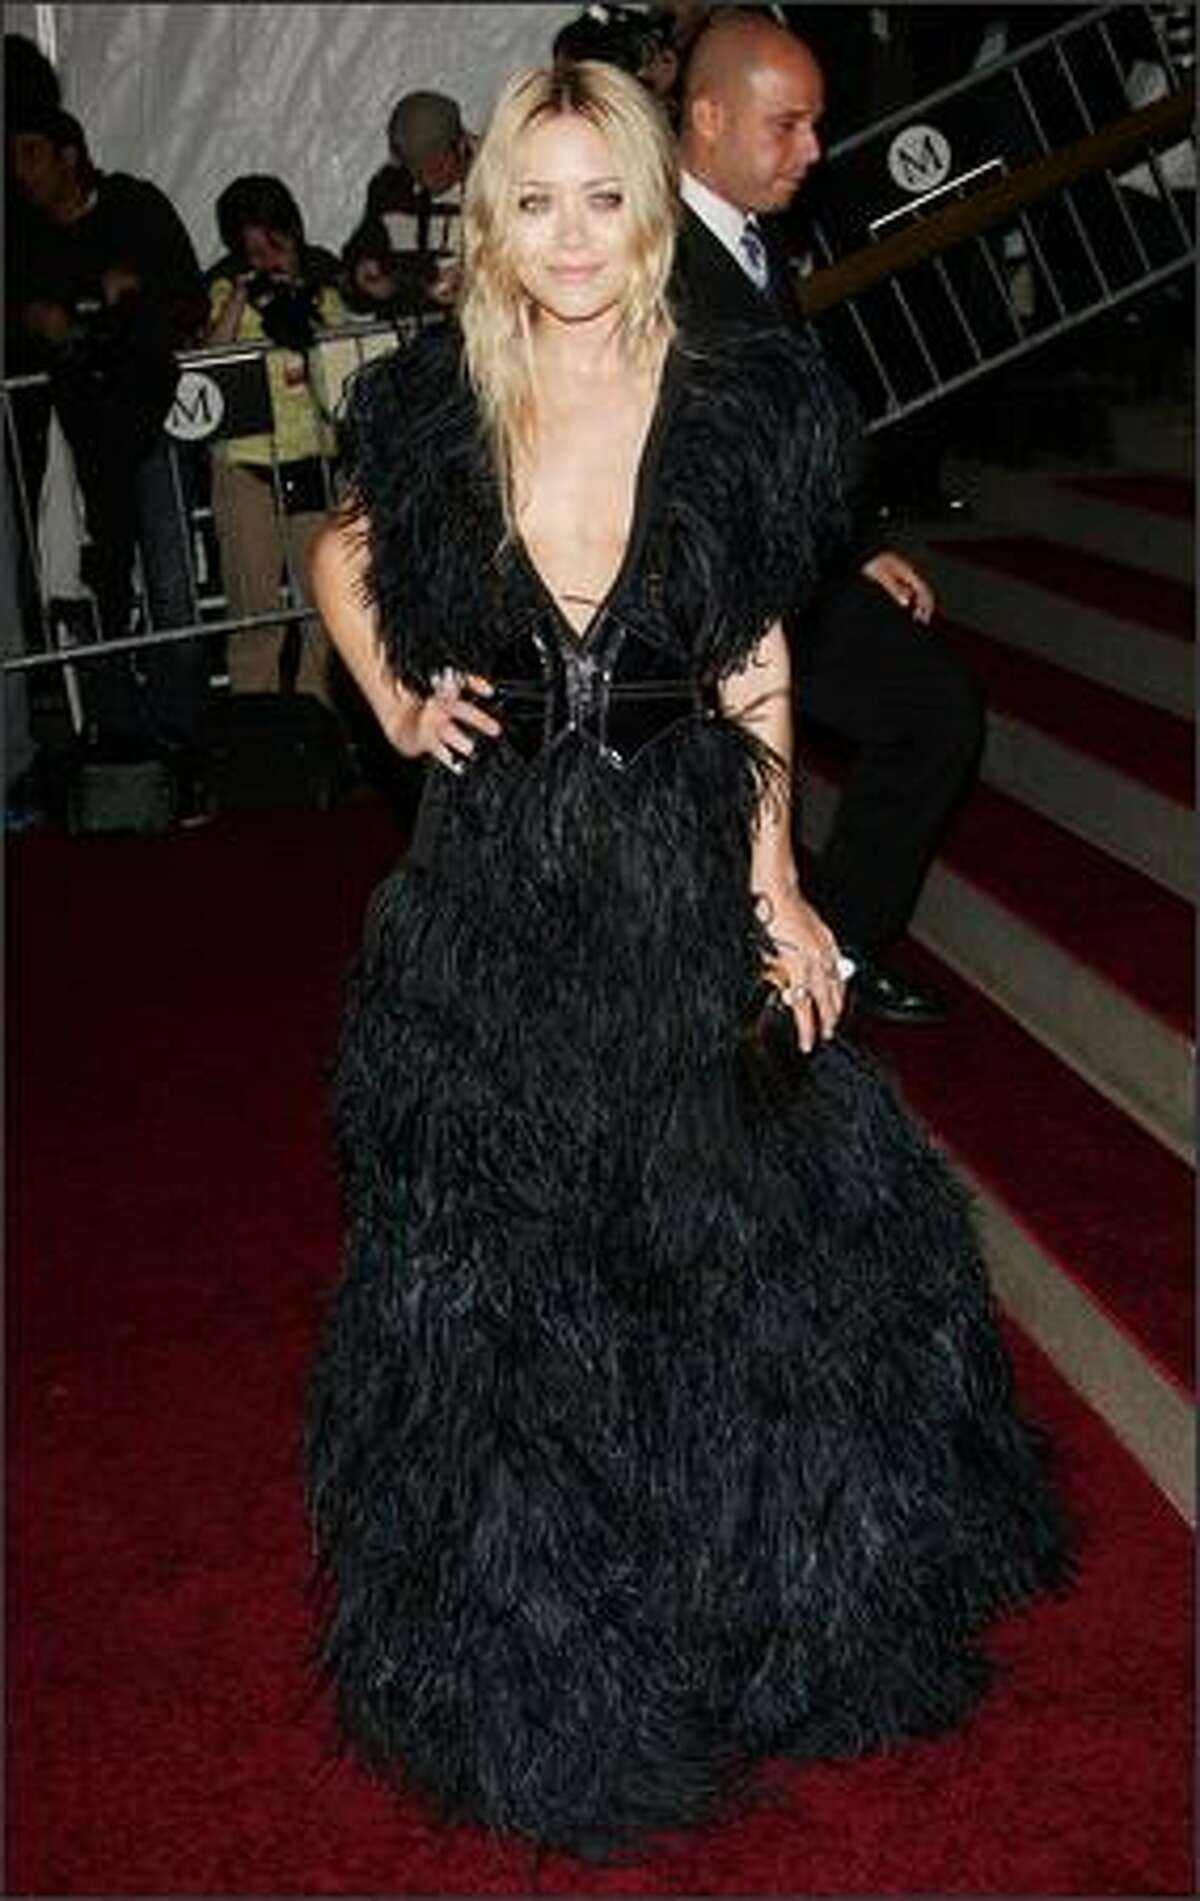 Mary-Kate Olsen attends the Metropolitan Museum of Art Costume Institute Benefit Gala "Poiret: King Of Fashion" at the Metropolitan Museum of Art on May 7, 2007 in New York City. She is on Mr. Blackwell's 48th annual worst-dressed list.